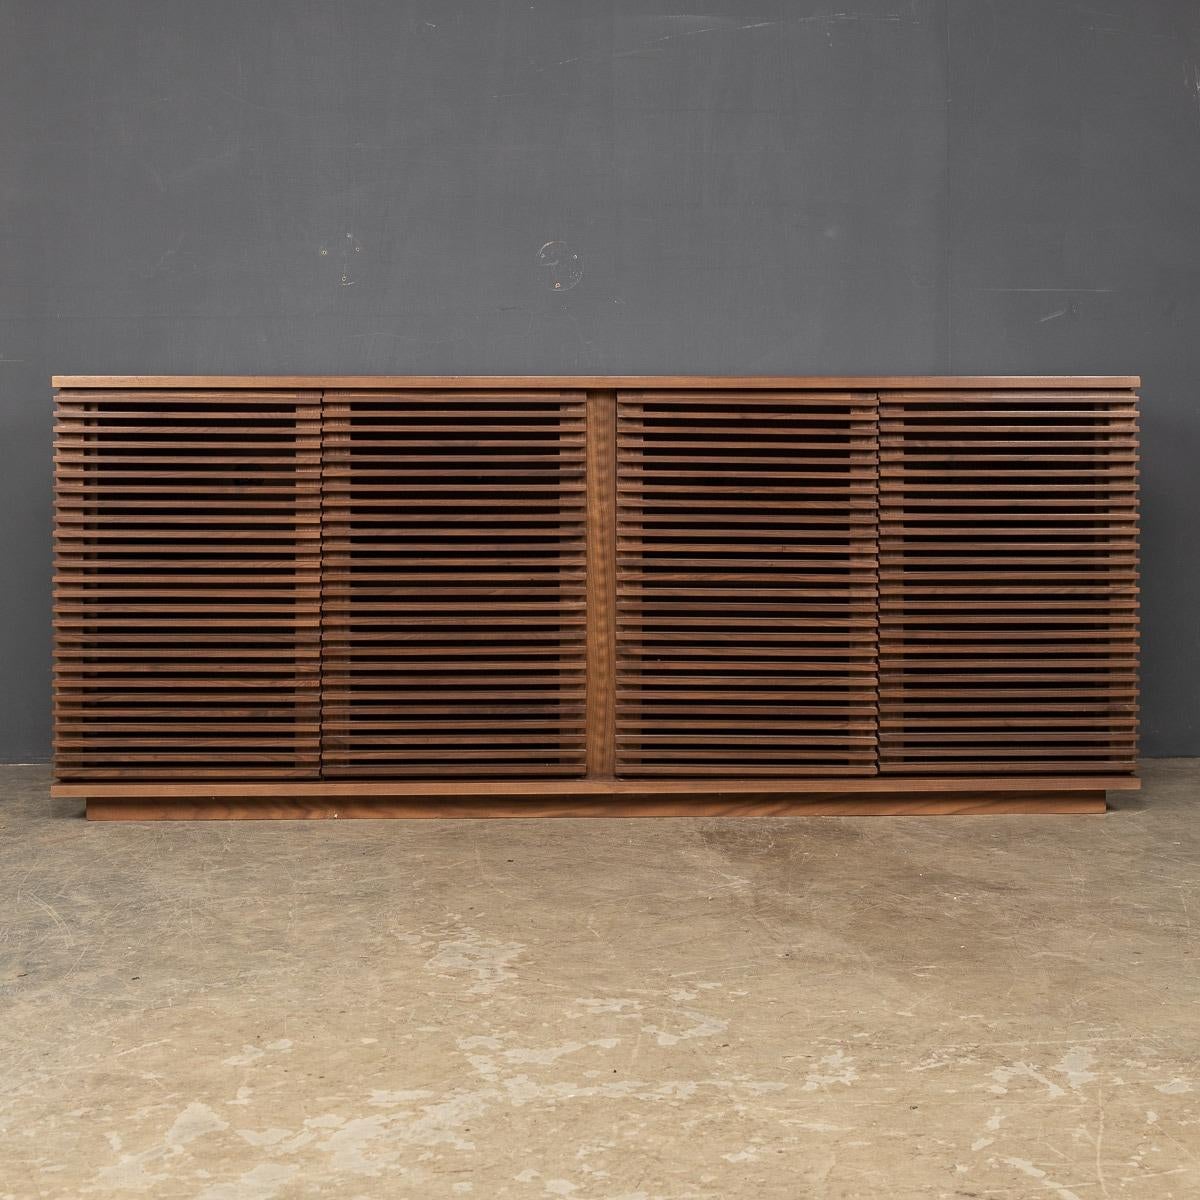 Late 20th Century walnut sideboard created exclusively for Heals by award winning designer Nathan Yong. This striking Credenza is part of a range called “Linea” in the late 20th Century. A sleek design with four opening doors revealing two cupboards